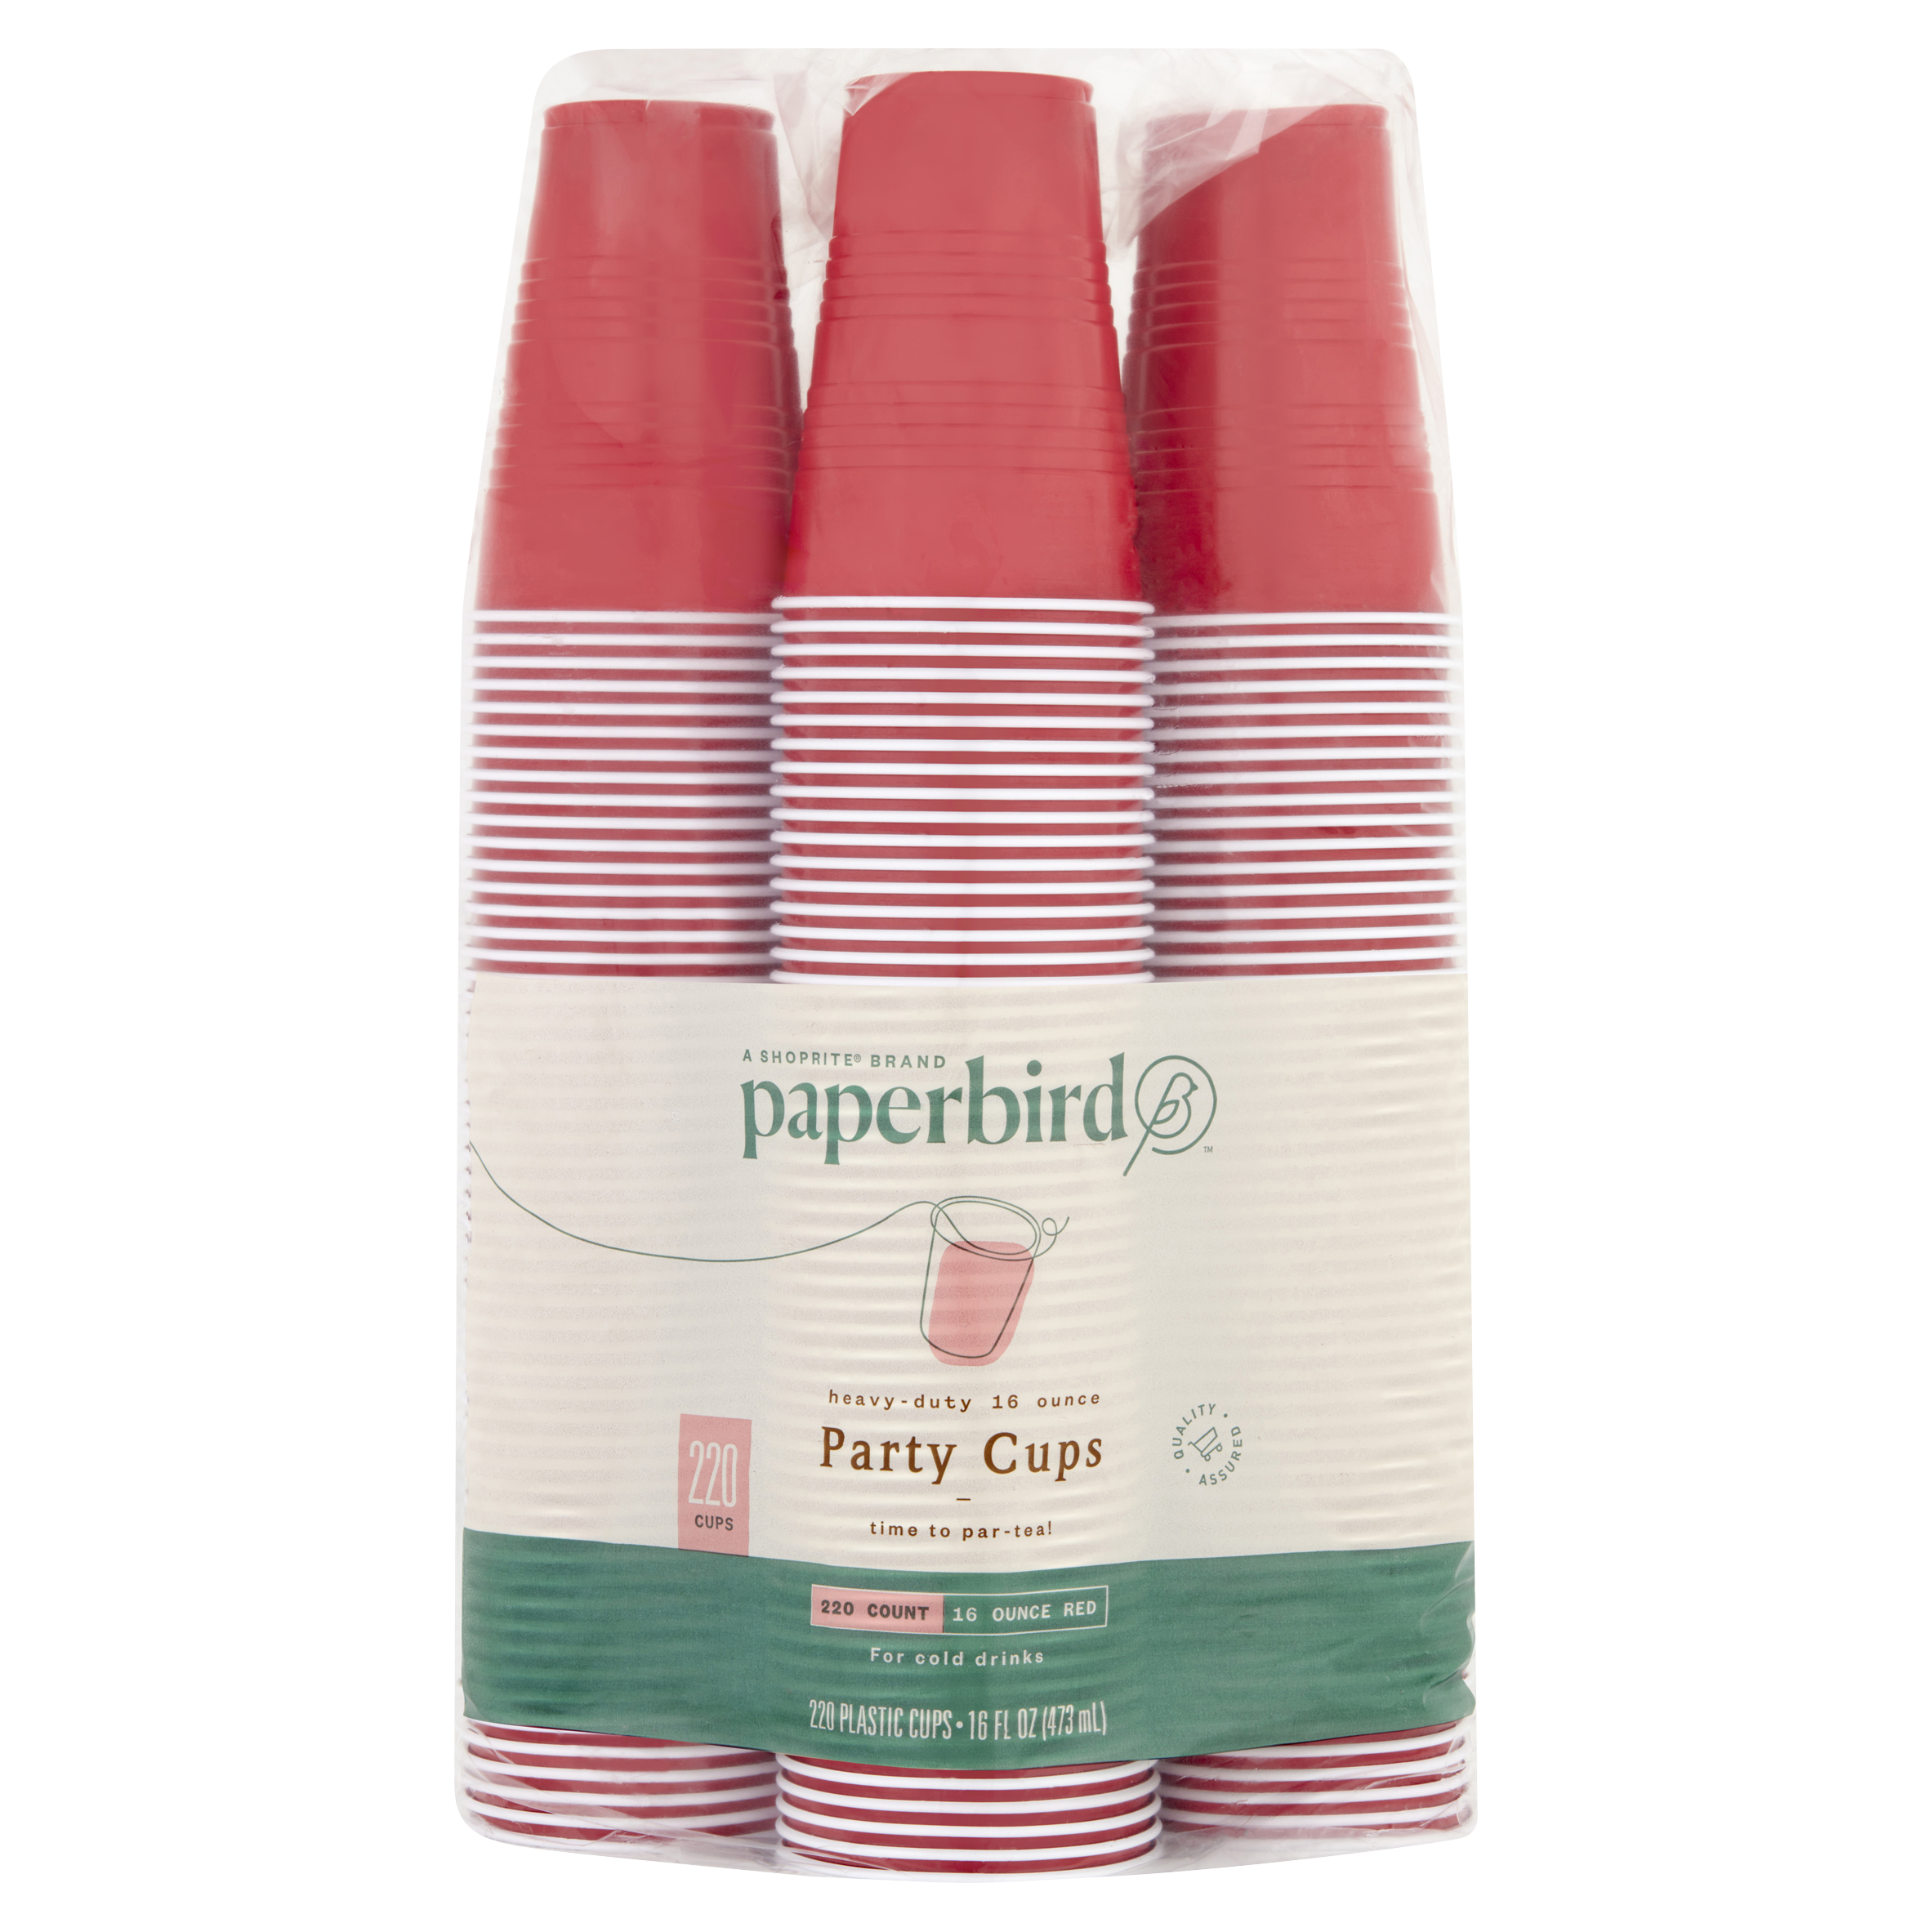 Hefty Everyday 16 oz Disposable Party Cups - 16 fl oz - 100 / Pack